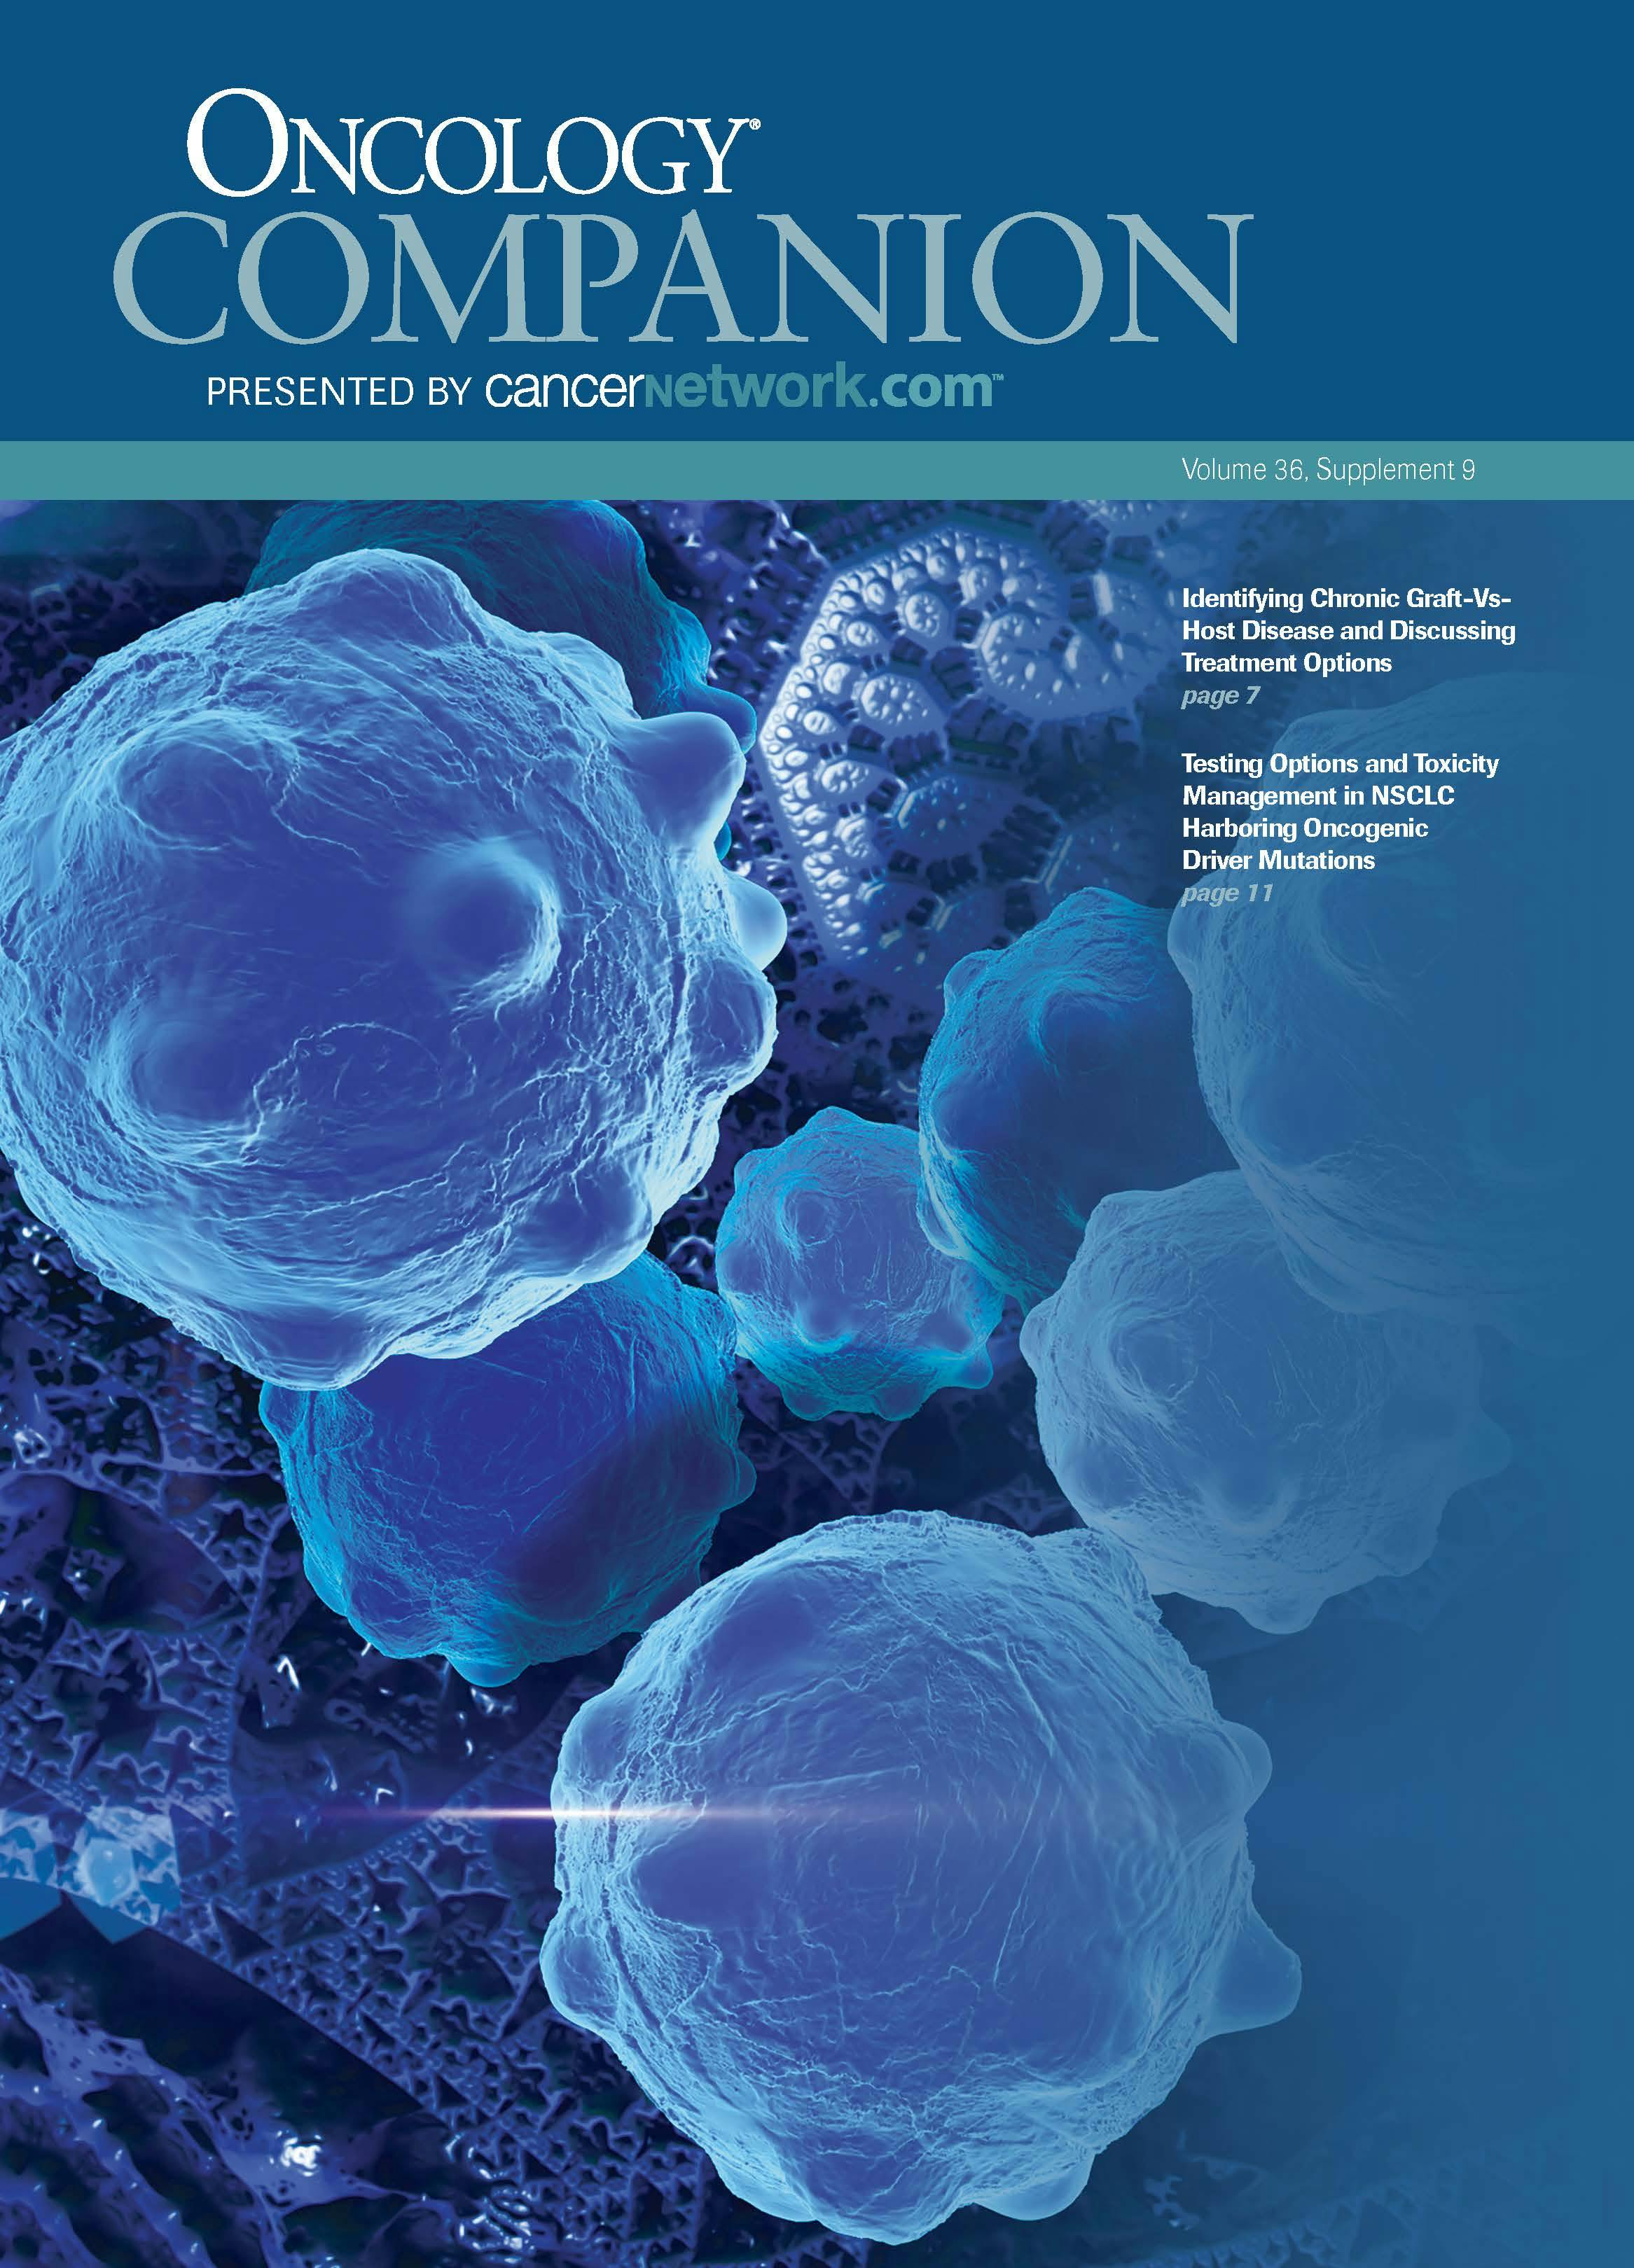 ONCOLOGY® Companion, Volume 36, Supplement 9